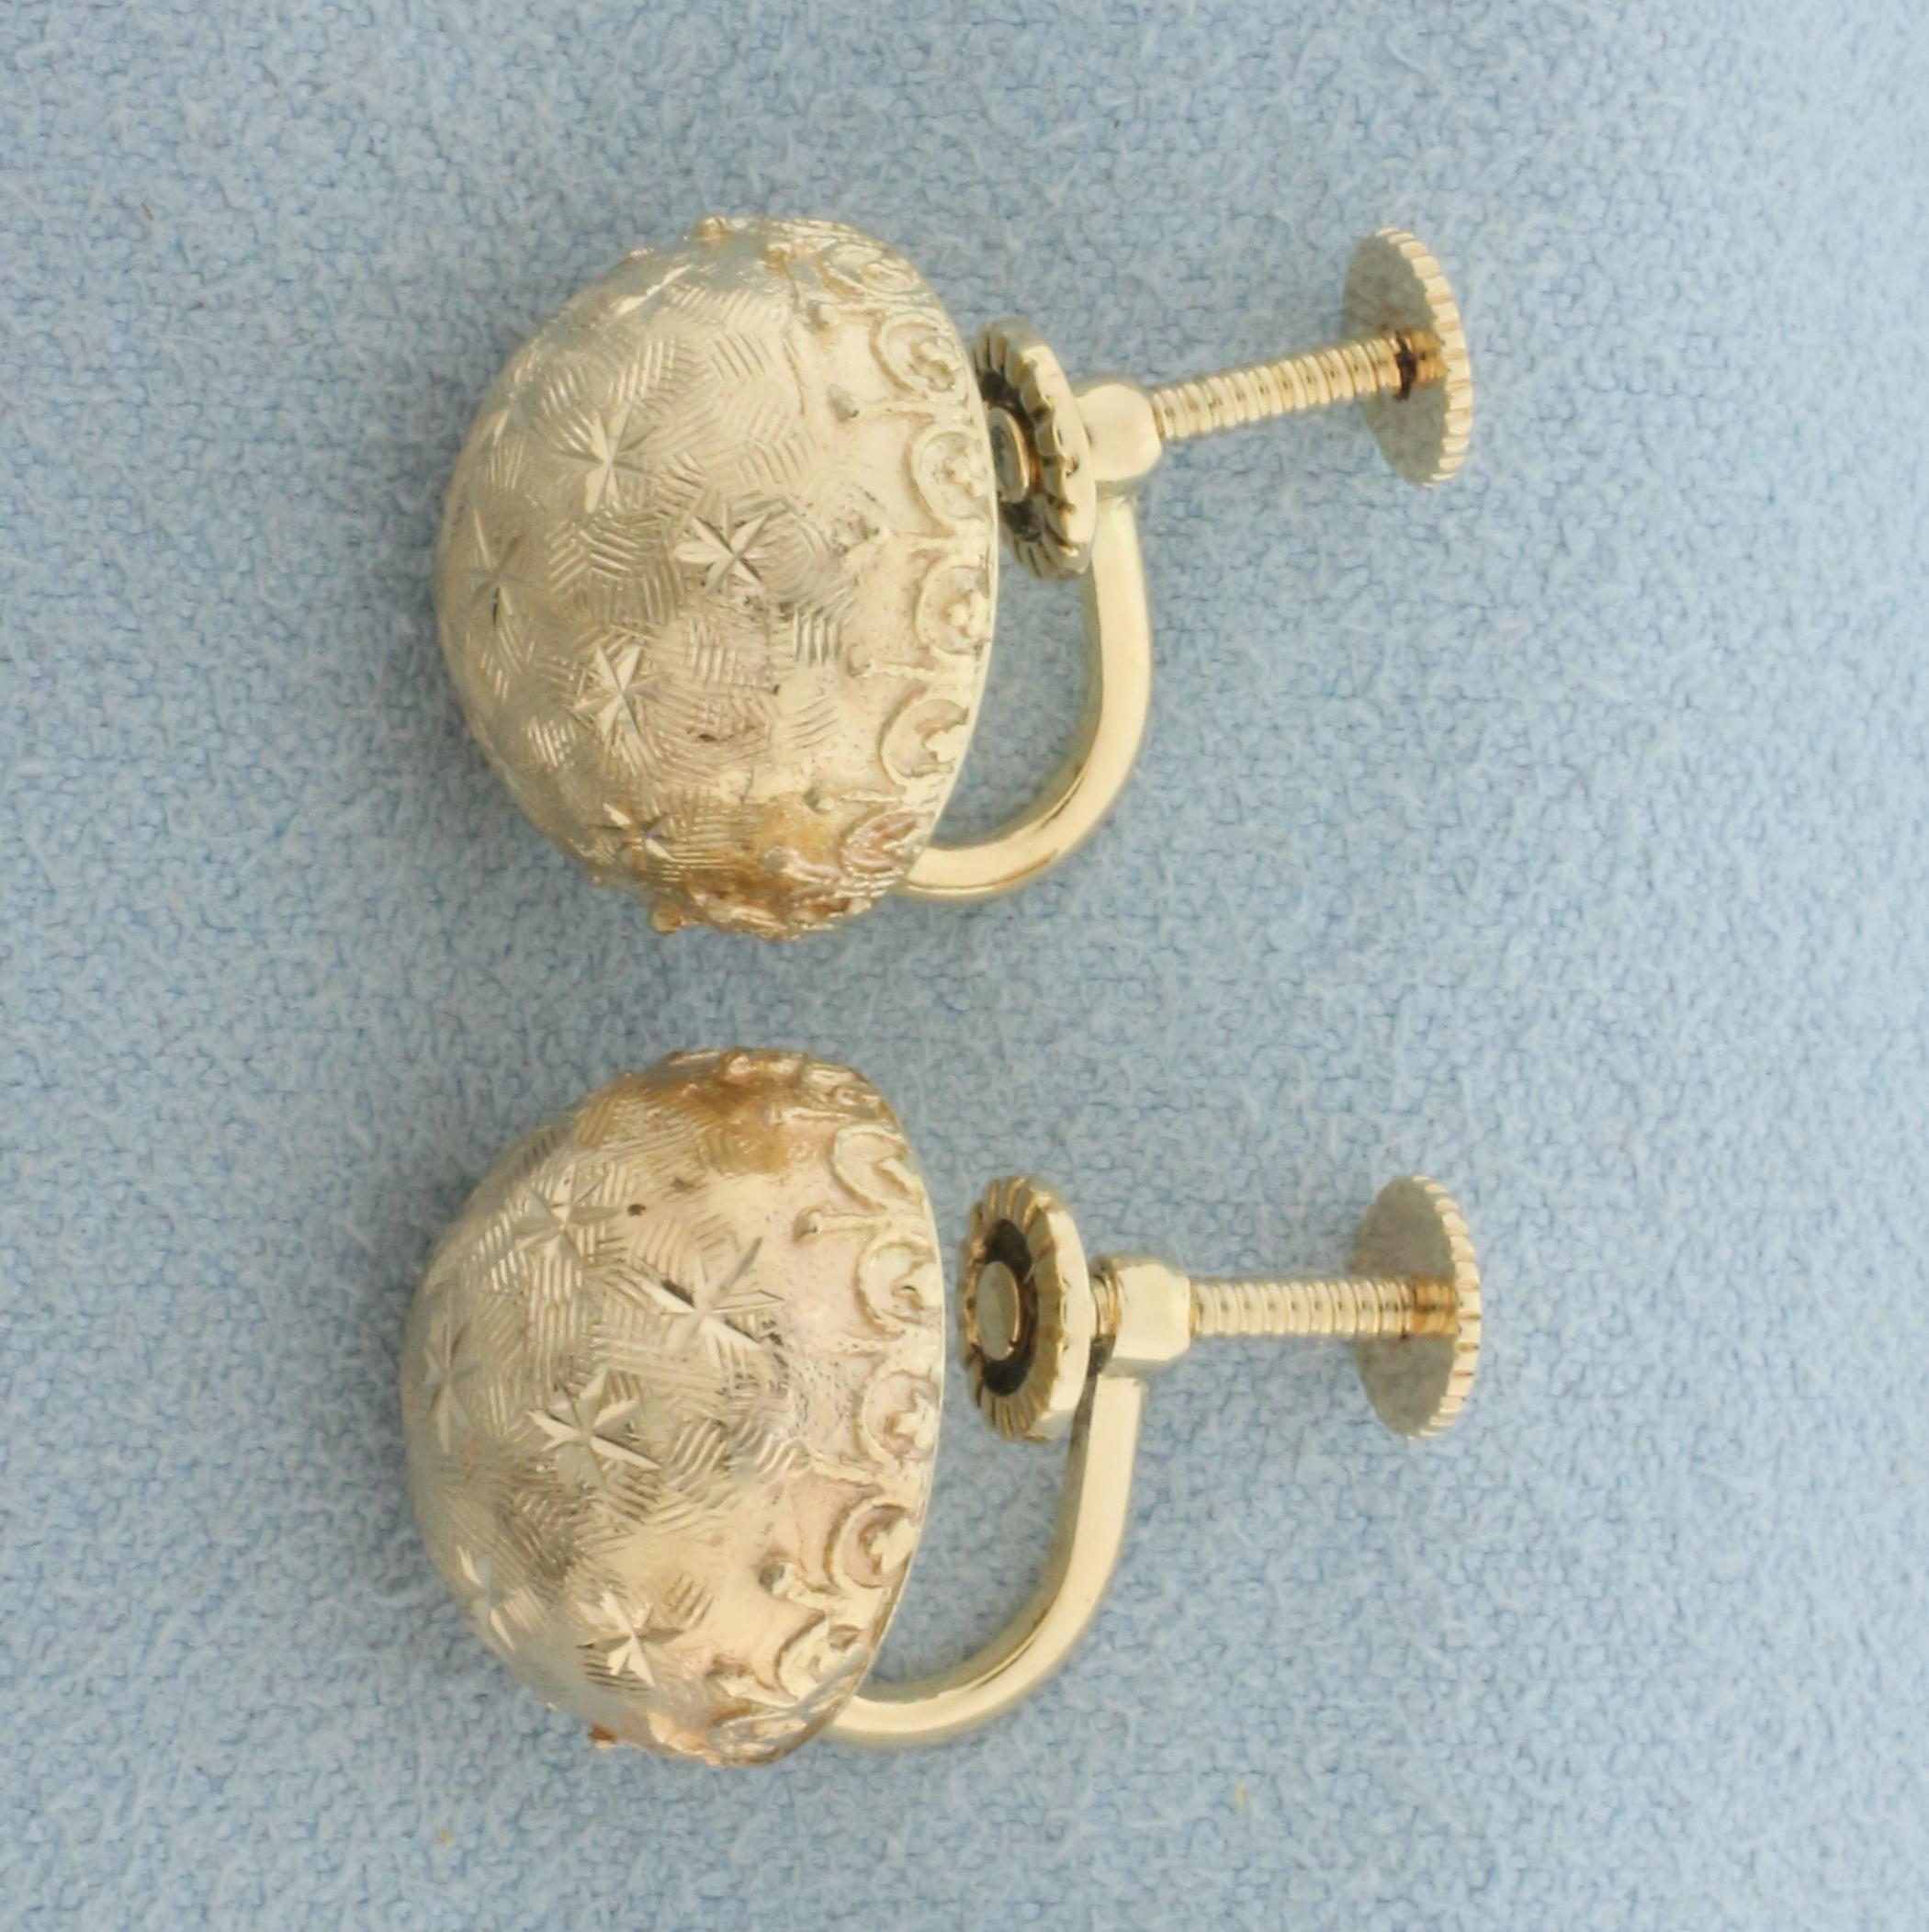 Vintage Starburst Half Dome Button Screw Back Earrings In 14k Yellow Gold